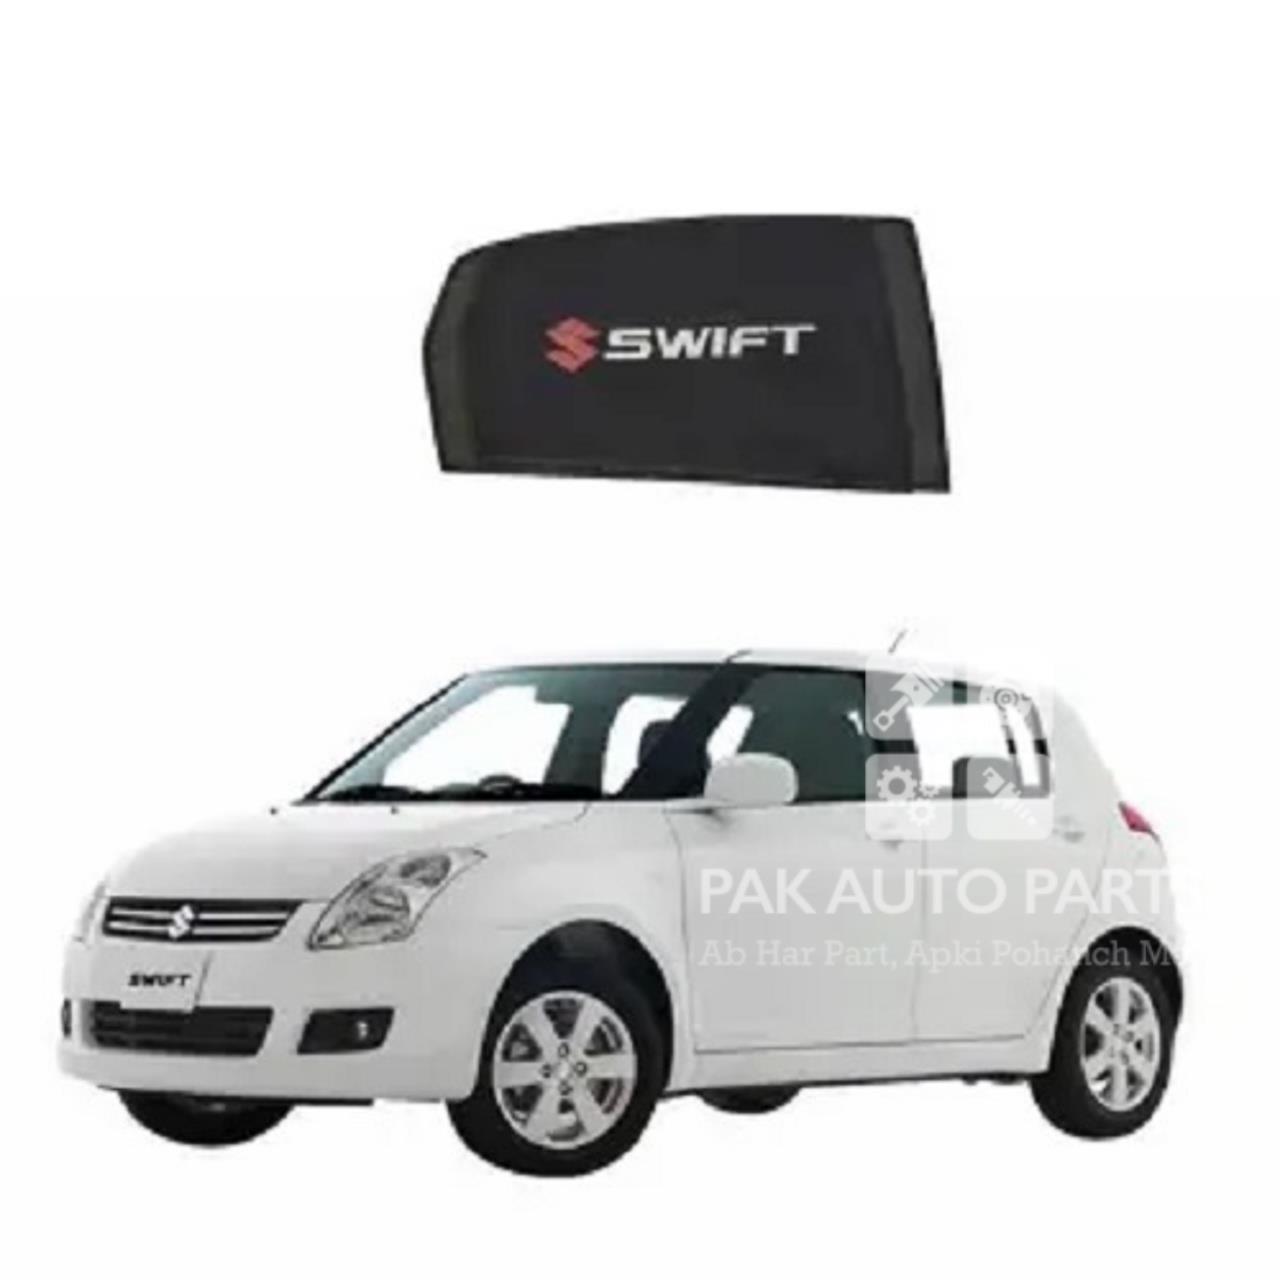 Picture of Suzuki Swift 2010-2021 Sun Shades Car Windows Curtains 4 pieces With Swift Logo | Fold-able | Jet Black